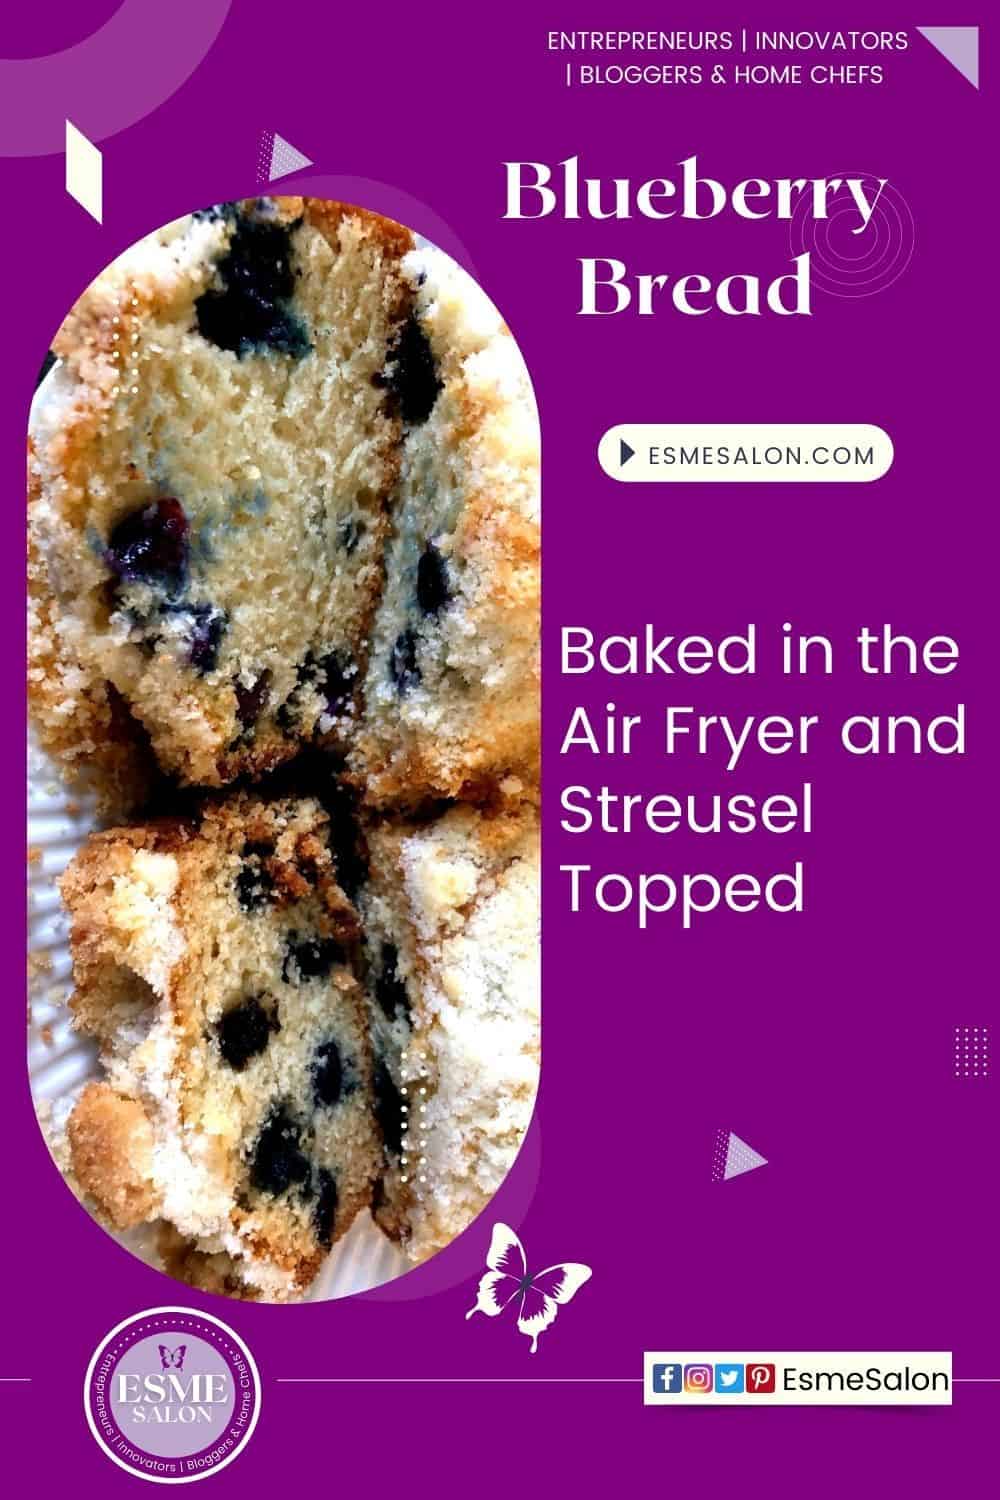 Two Streusel Topped Blueberry Bread made in the Air Fryer